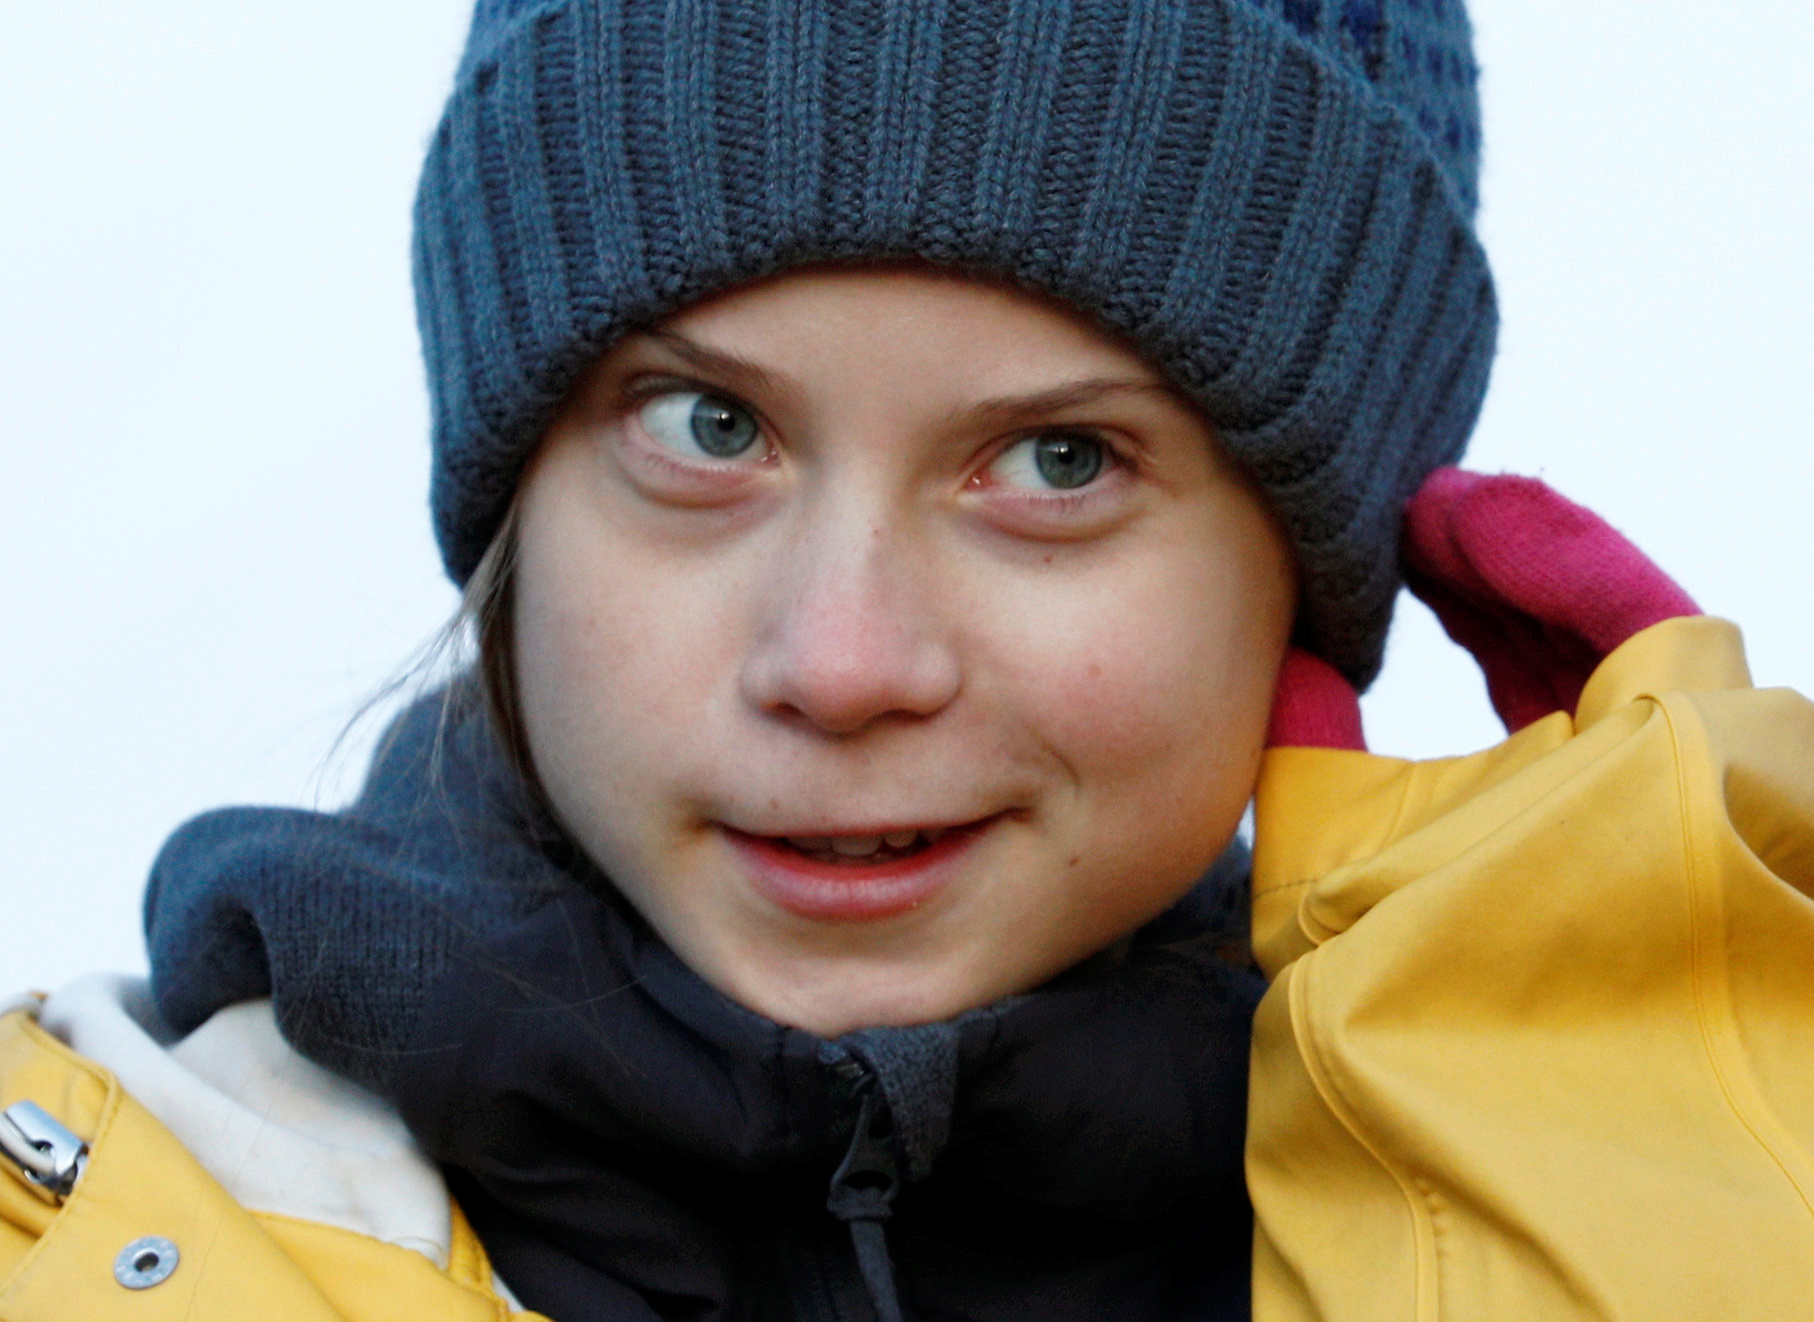 Climate change activist Greta Thunberg attends a Fridays for Future protest in Turin, Italy December 13, 2019. REUTERS/Guglielmo Mangiapane